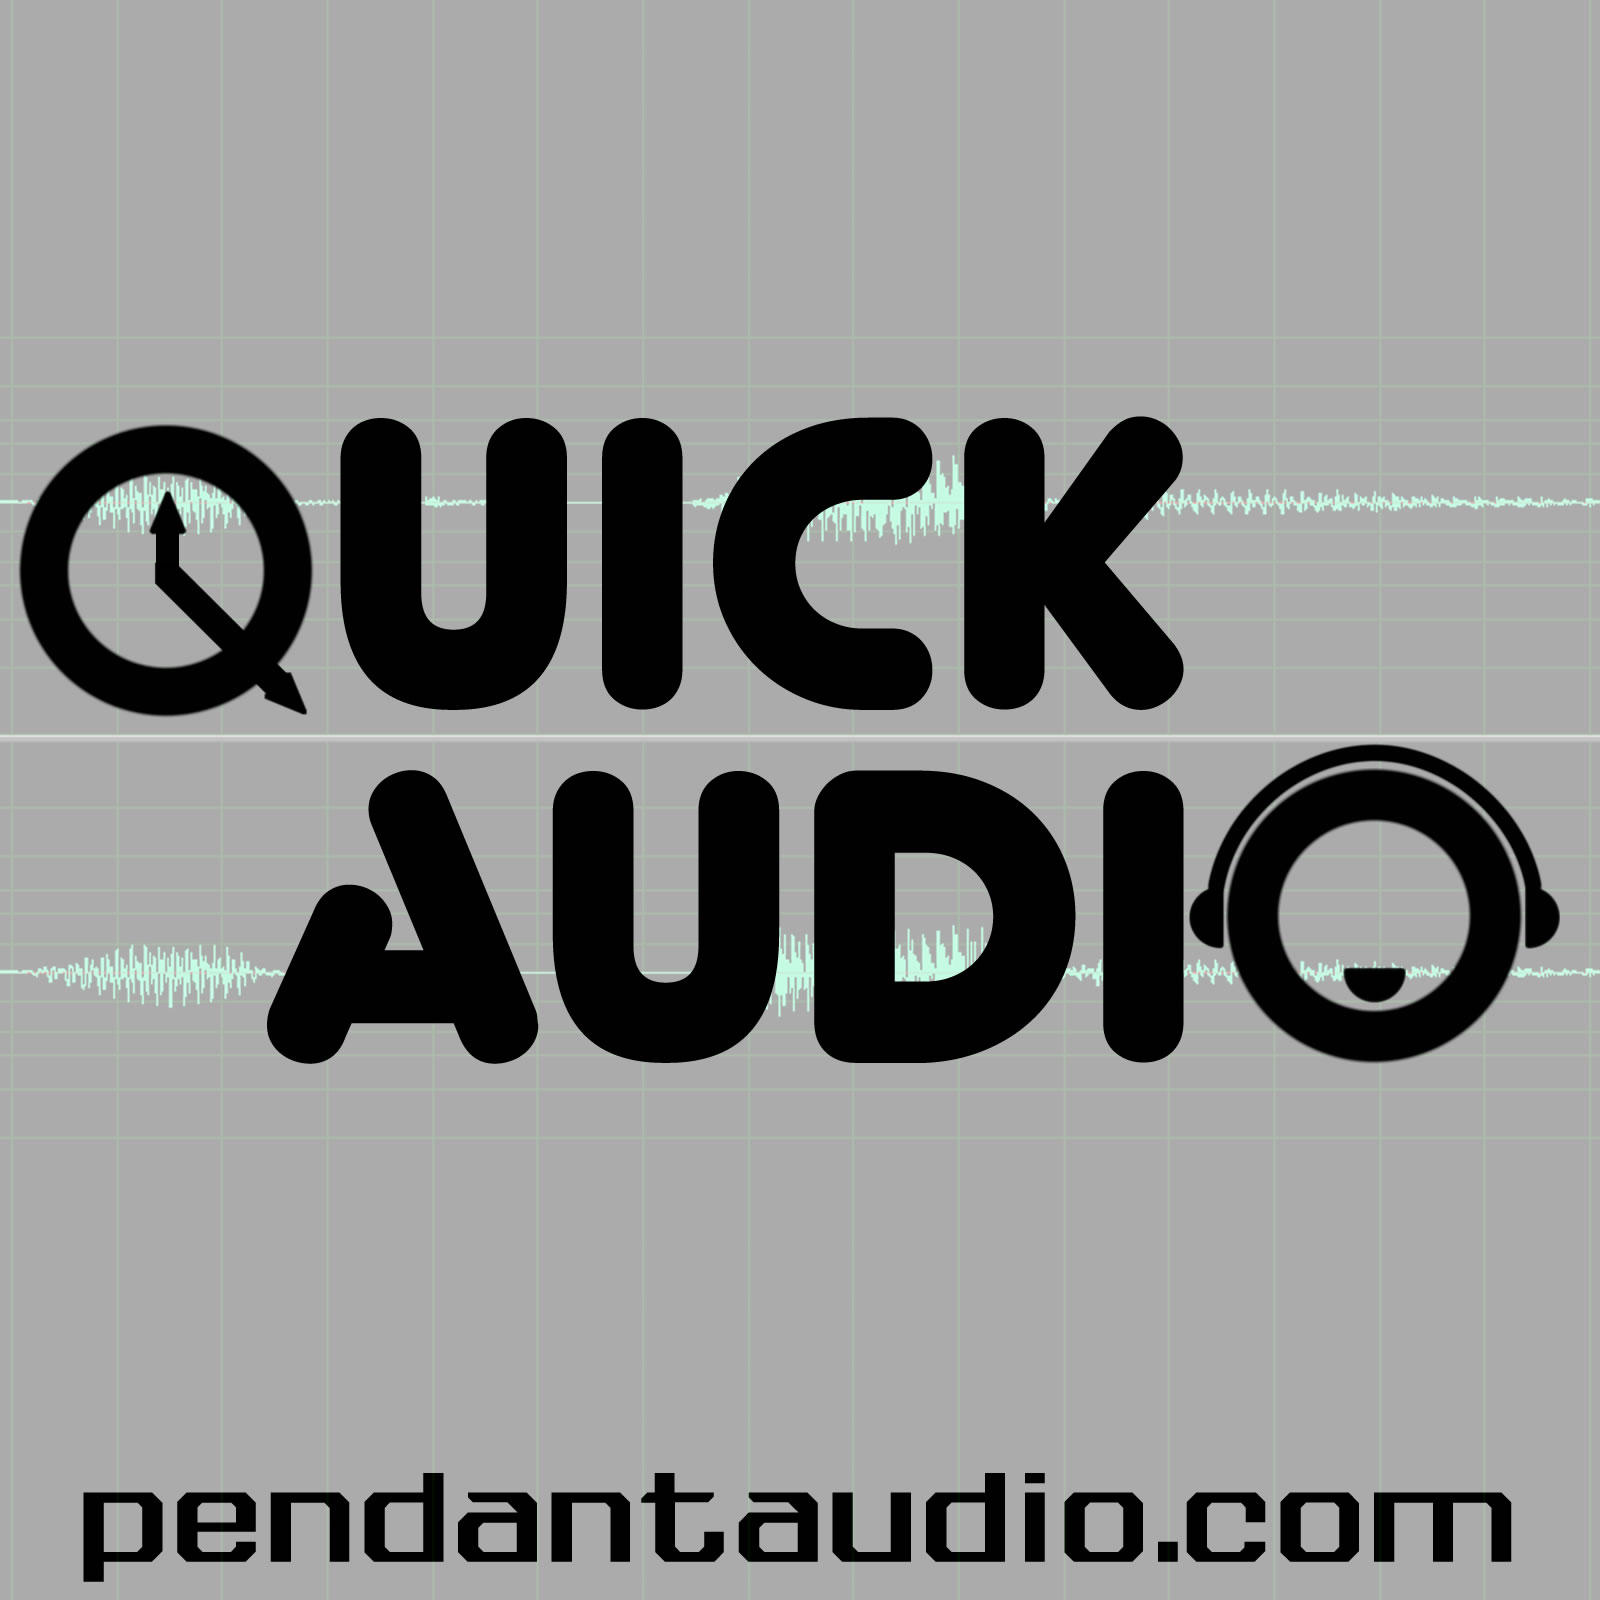 Quick Audio by Pendant Productions - a webcomic in audio form